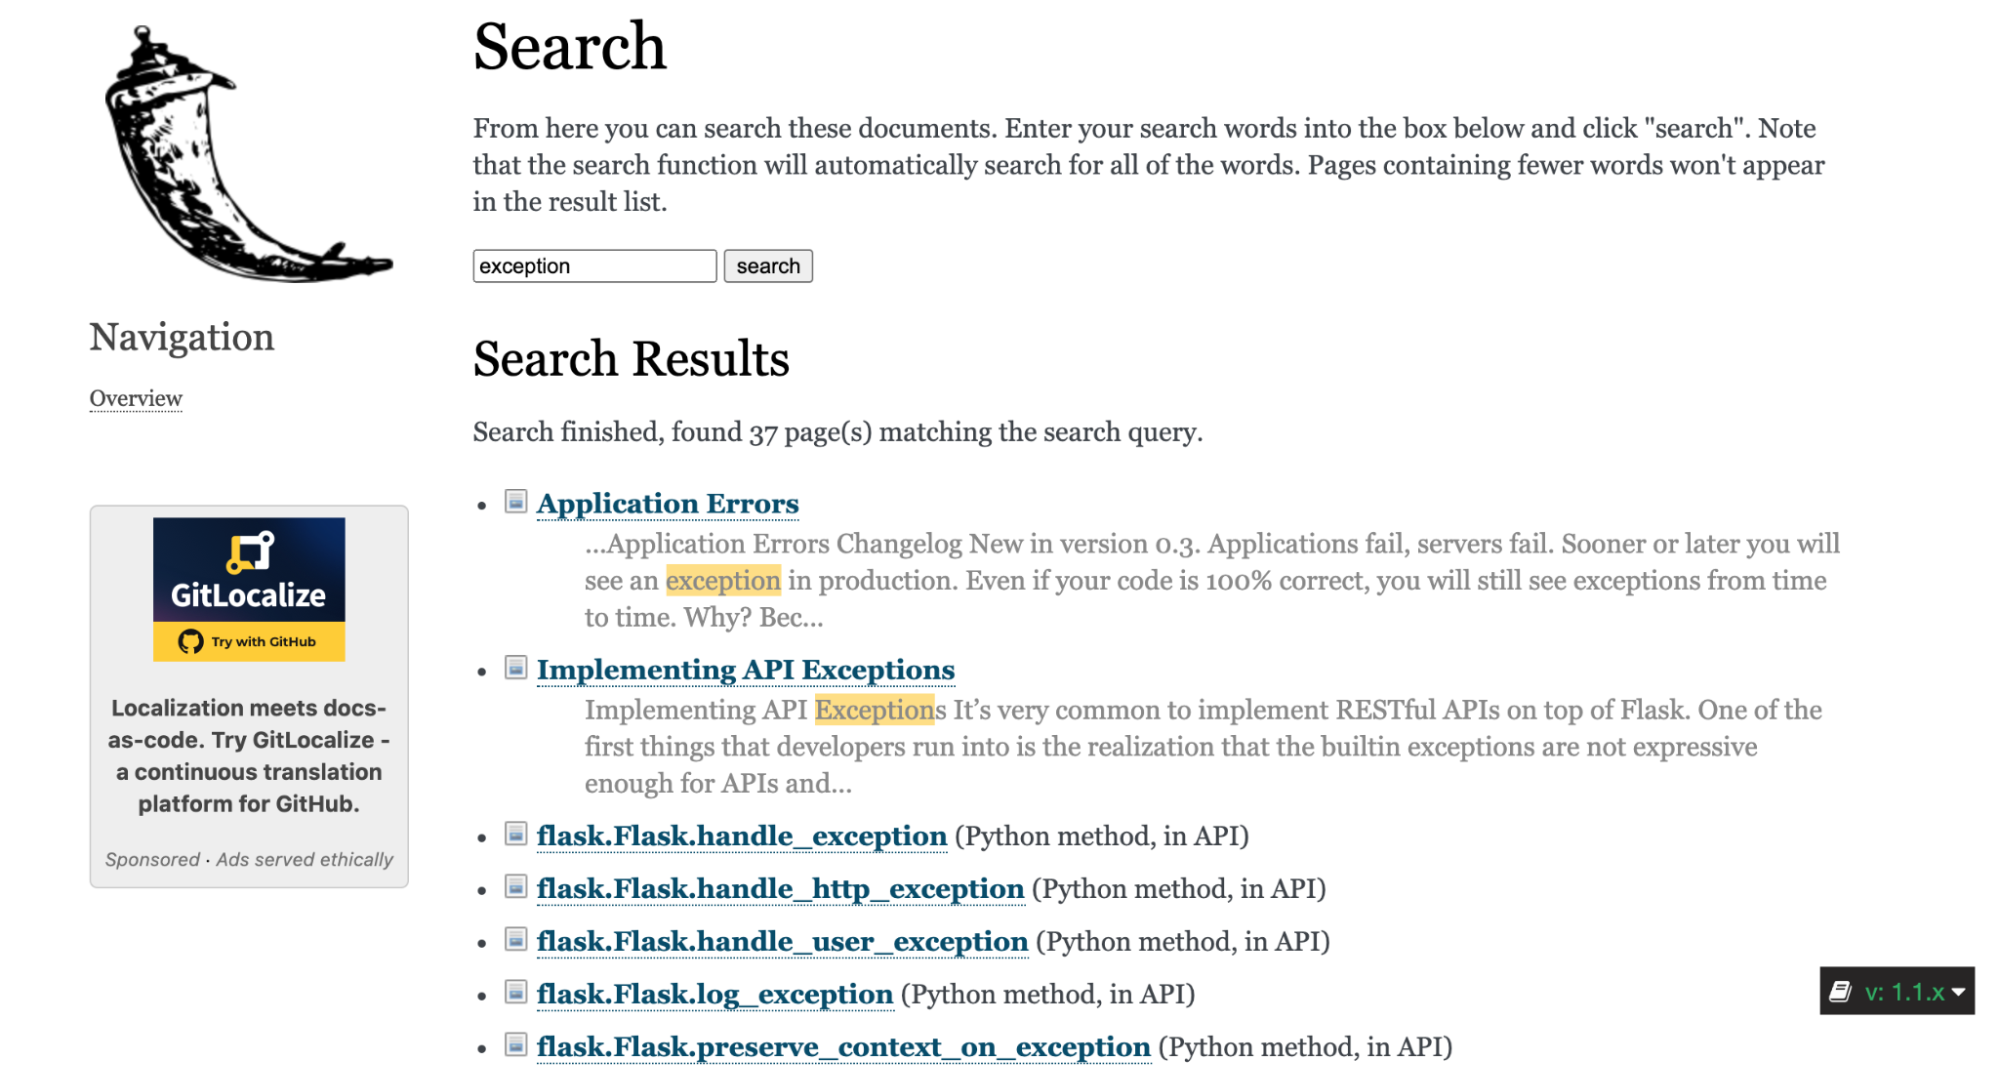 The results of an “exception”  search on the official Flask website